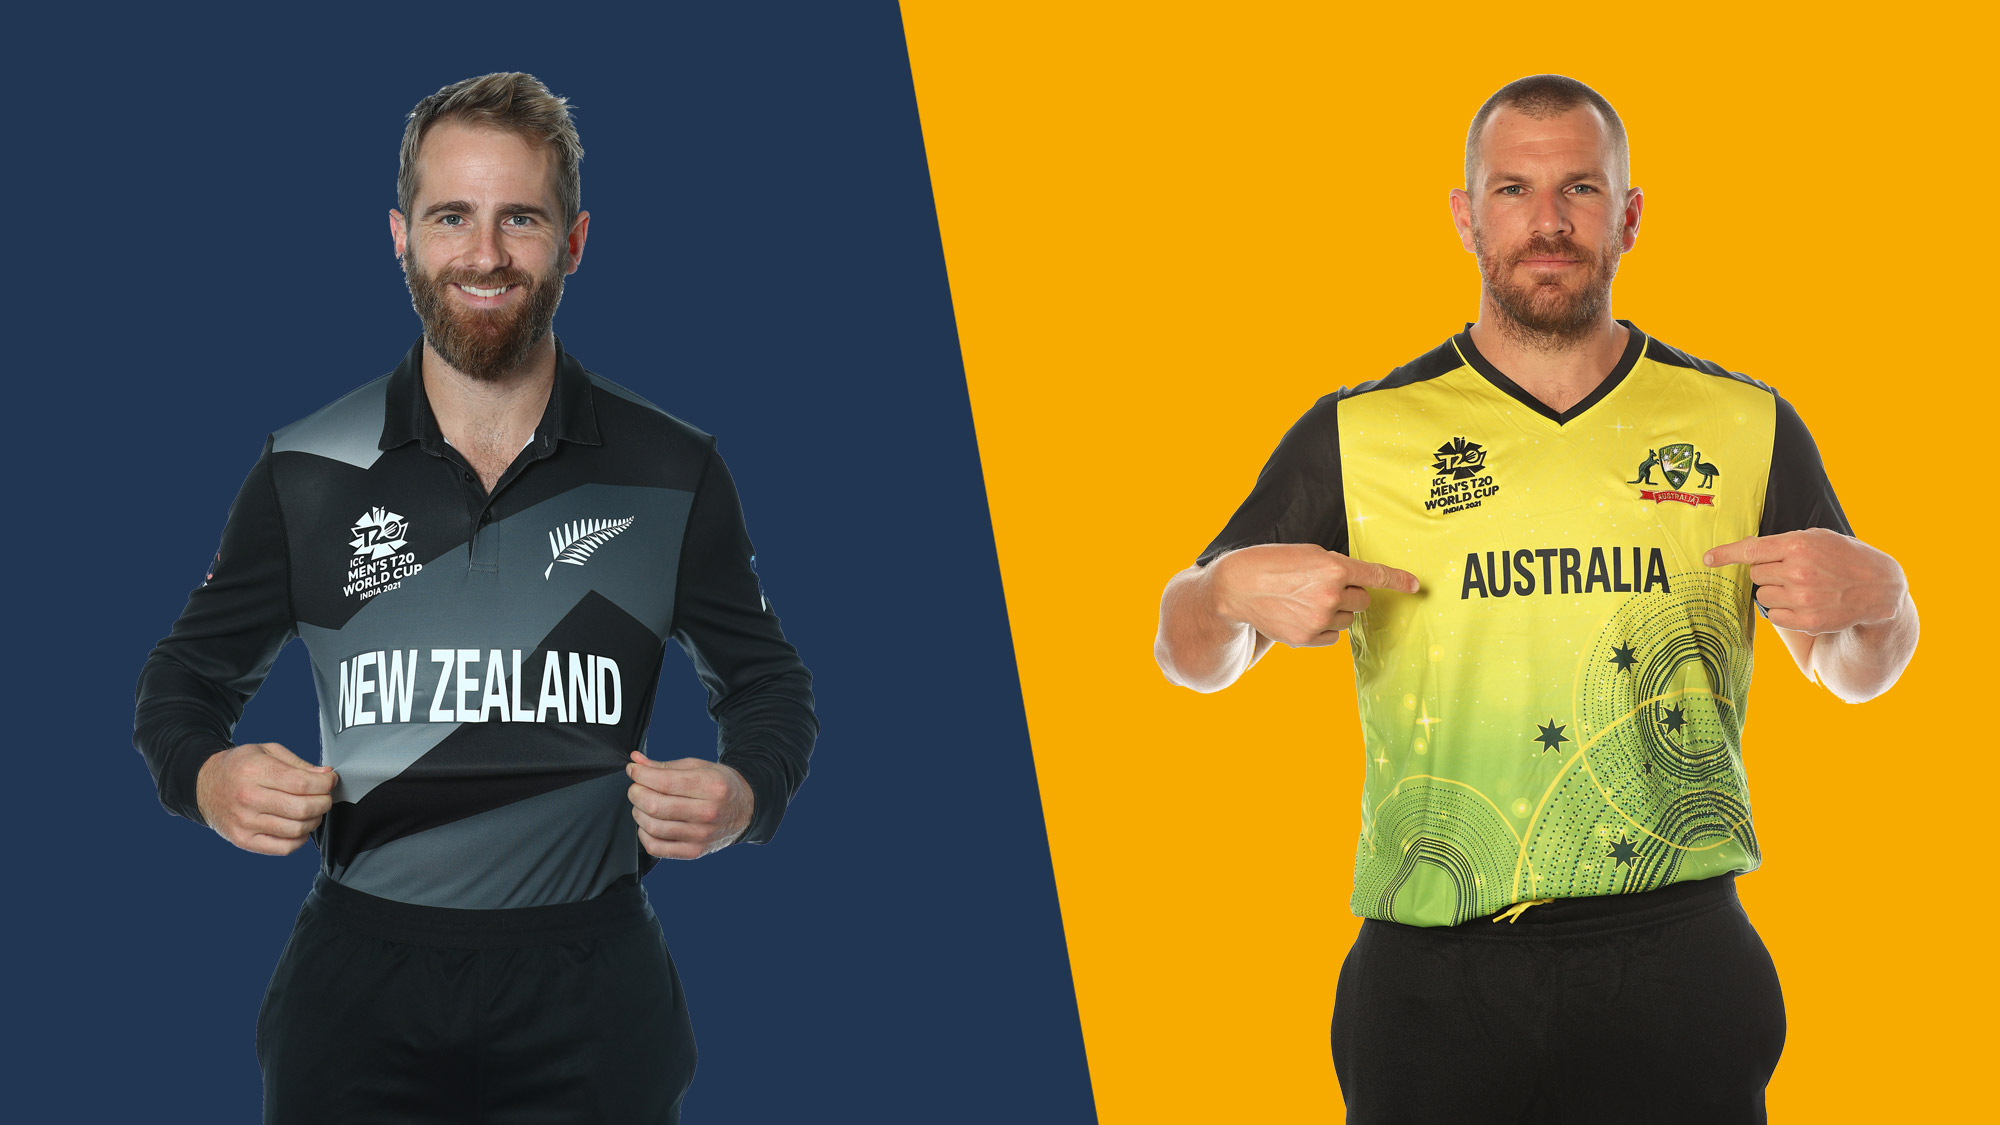 T20 world cup 2021 live